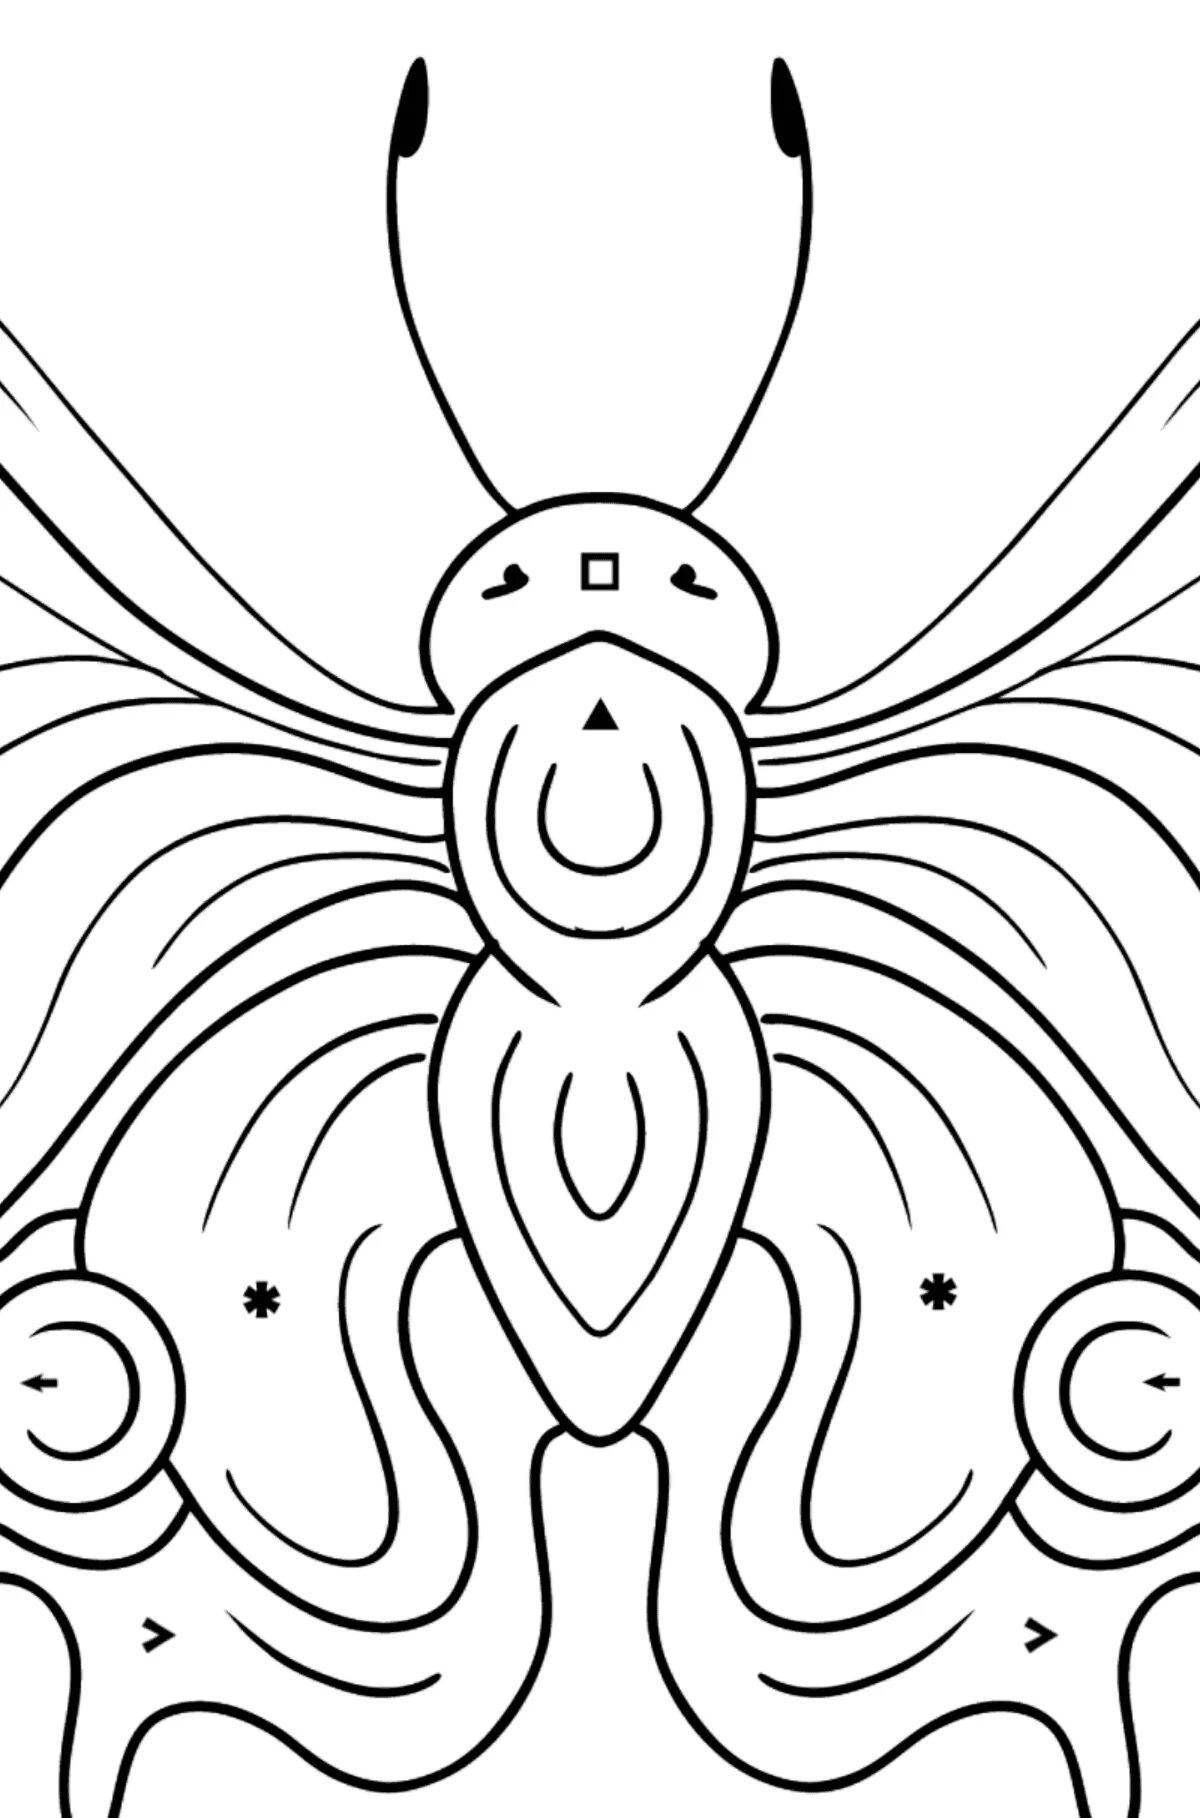 Vividly colored peacock butterfly coloring page